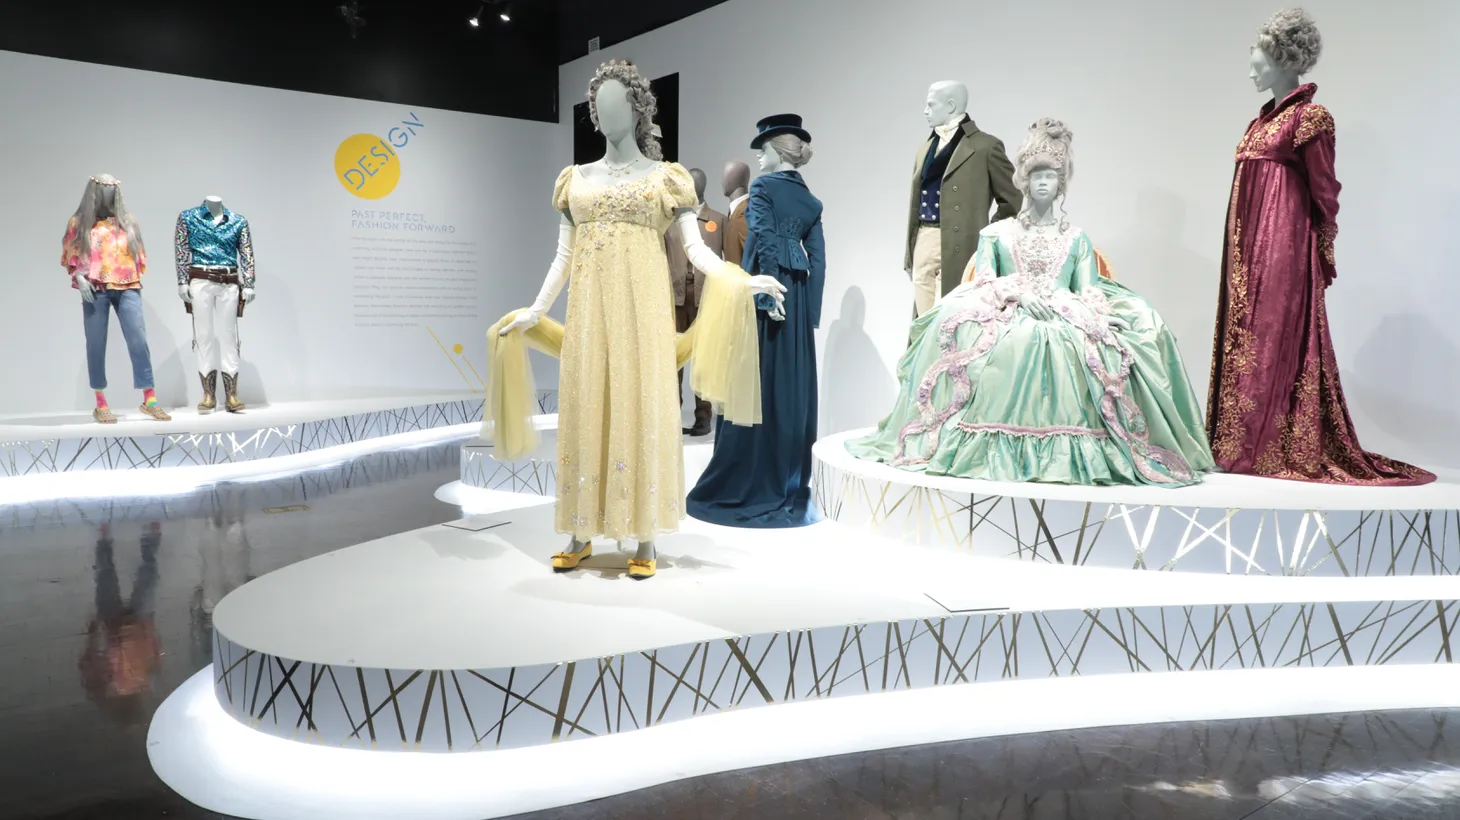 More than 20 Emmy Award-nominated shows, including Netflix’s “Bridgerton” and HBO’s “Euphoria,” are featured in this year’s “Art of Costume Design in Television” exhibit at the FIDM Museum.